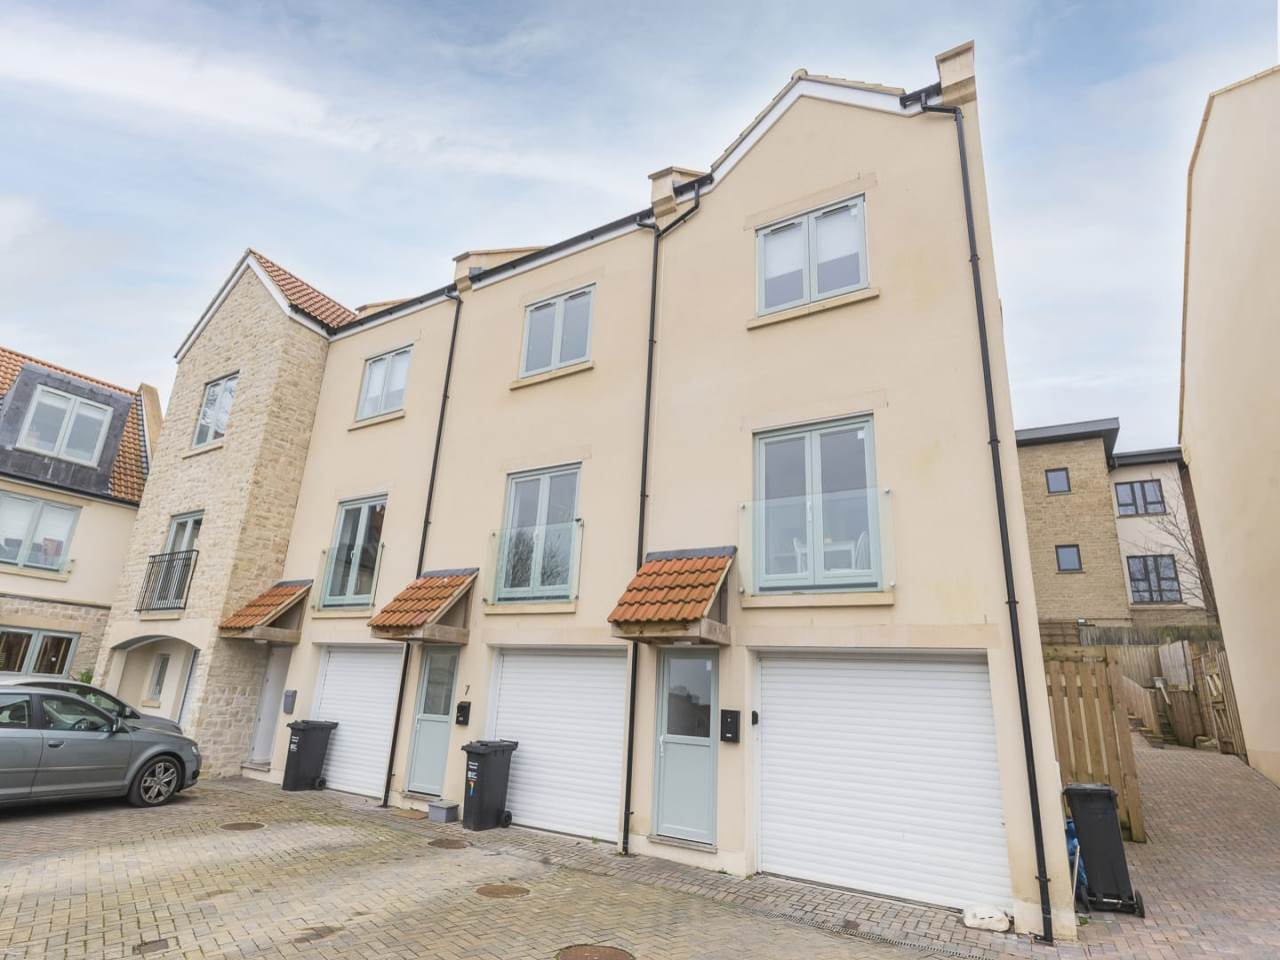 3 bed House (unspecified) for rent in Frome. From Lettings-R-Us Frome